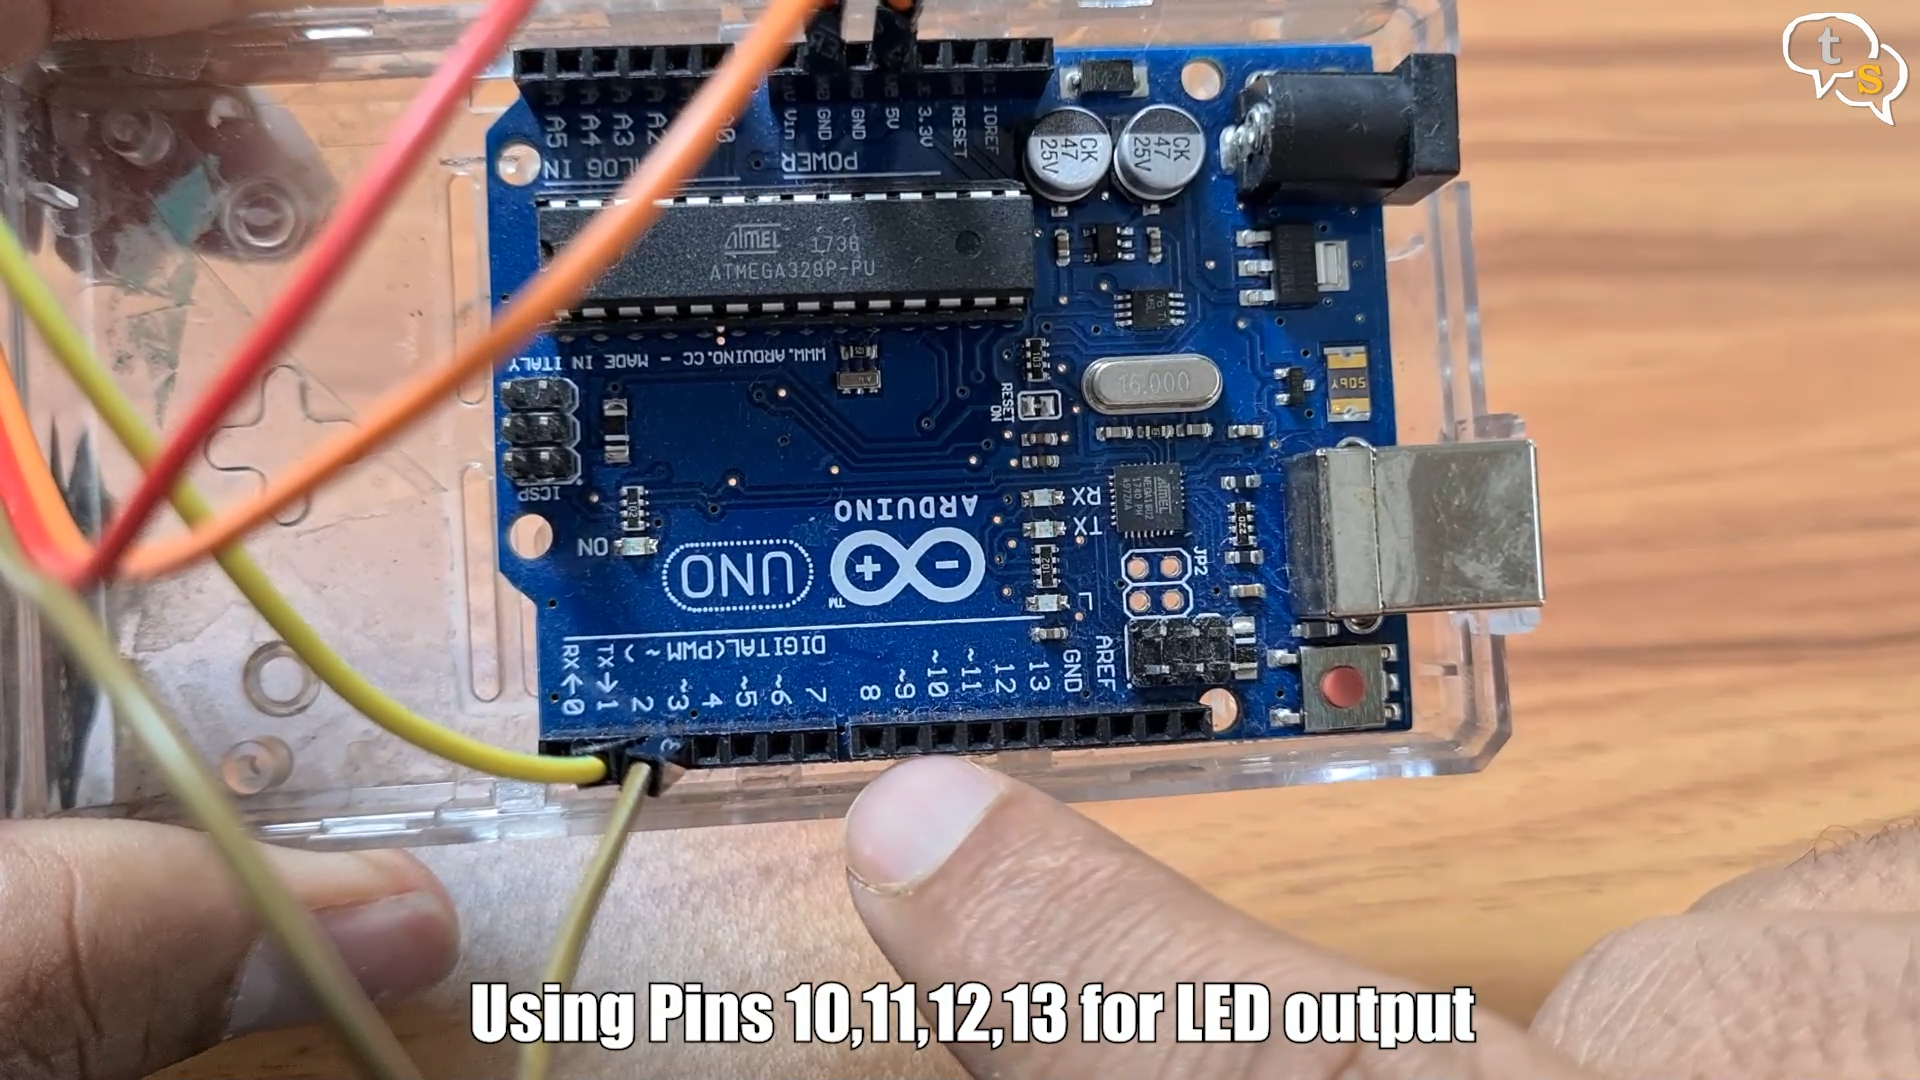 Pins 10,11,12,13 as Output to LED's